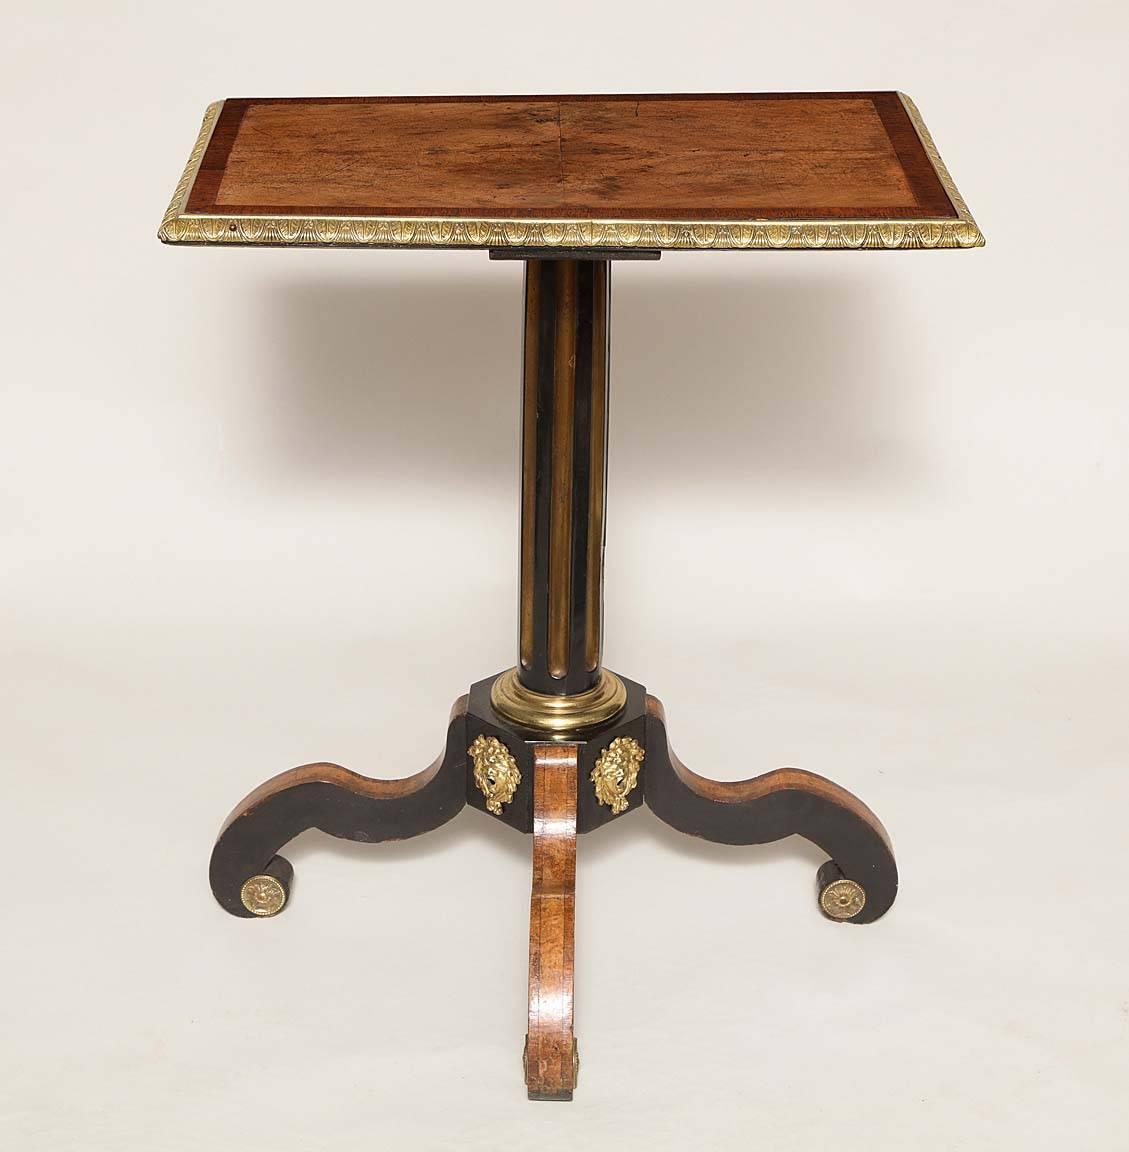 English early 19th century occasional table with ormolu mounts in walnut, rosewood and ebony veneer. The rectangular top with quarter veneered center in walnut, banded in rosewood, the edges trimmed in acanthus molded bronze on center shaft, the